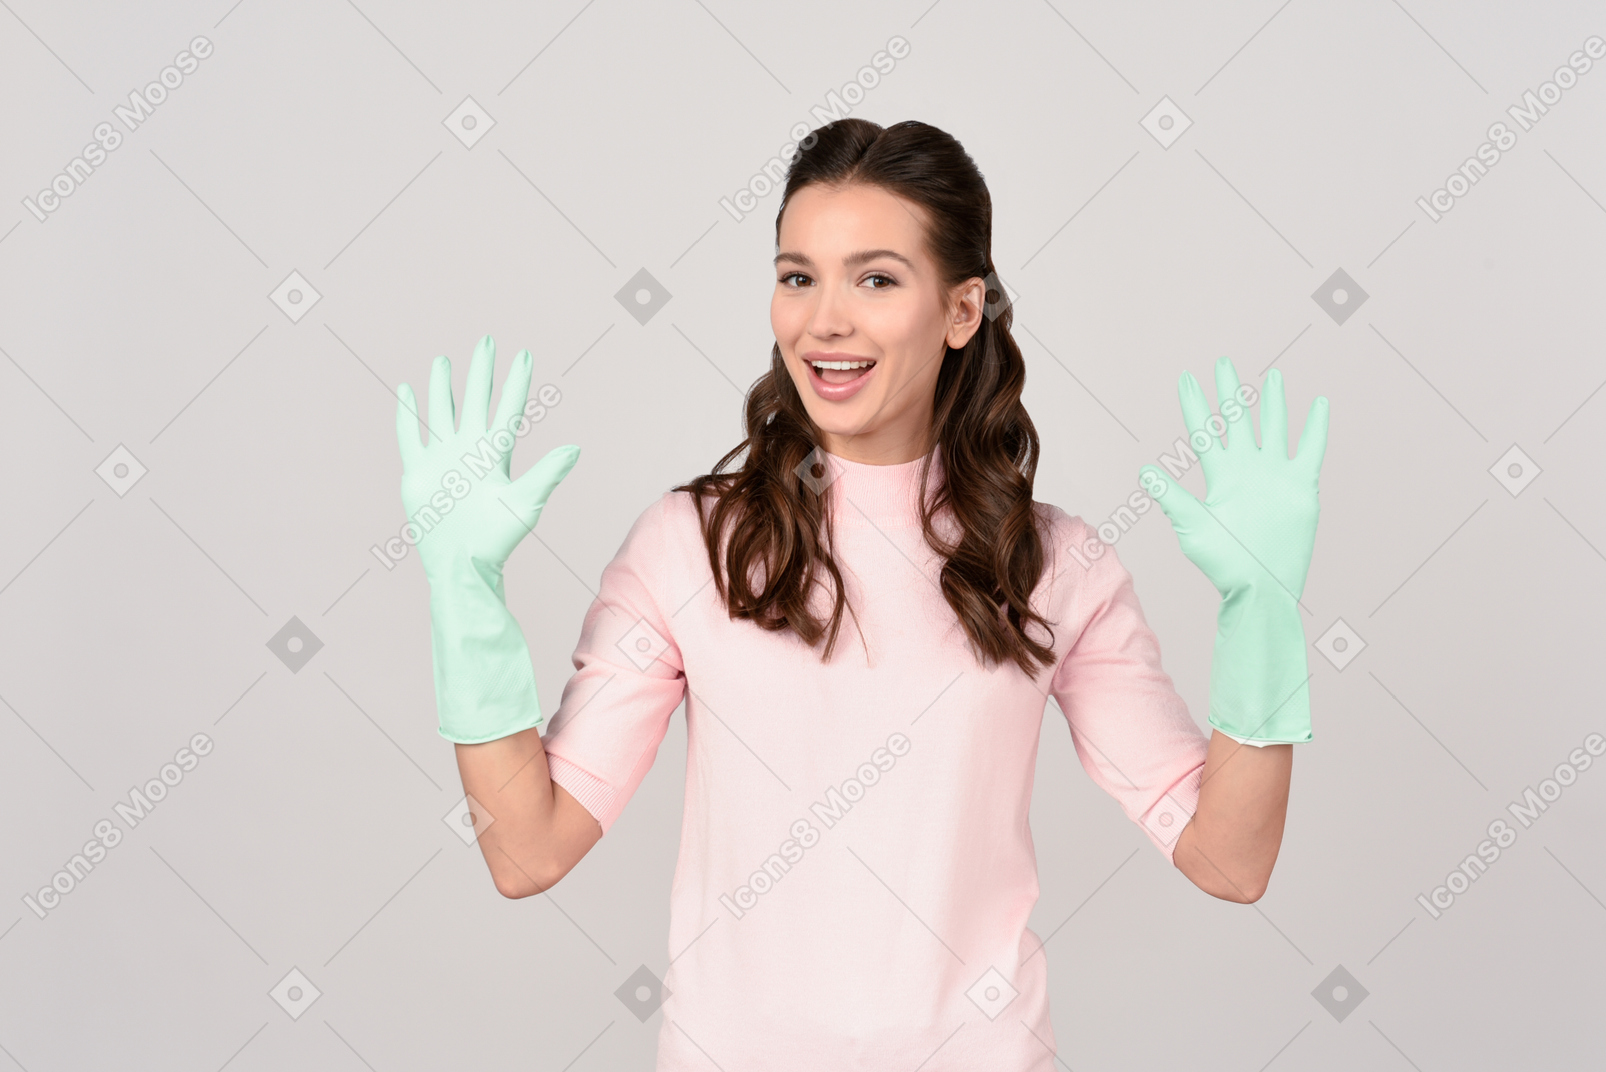 Attractive young woman pleased with her cleaning gloves